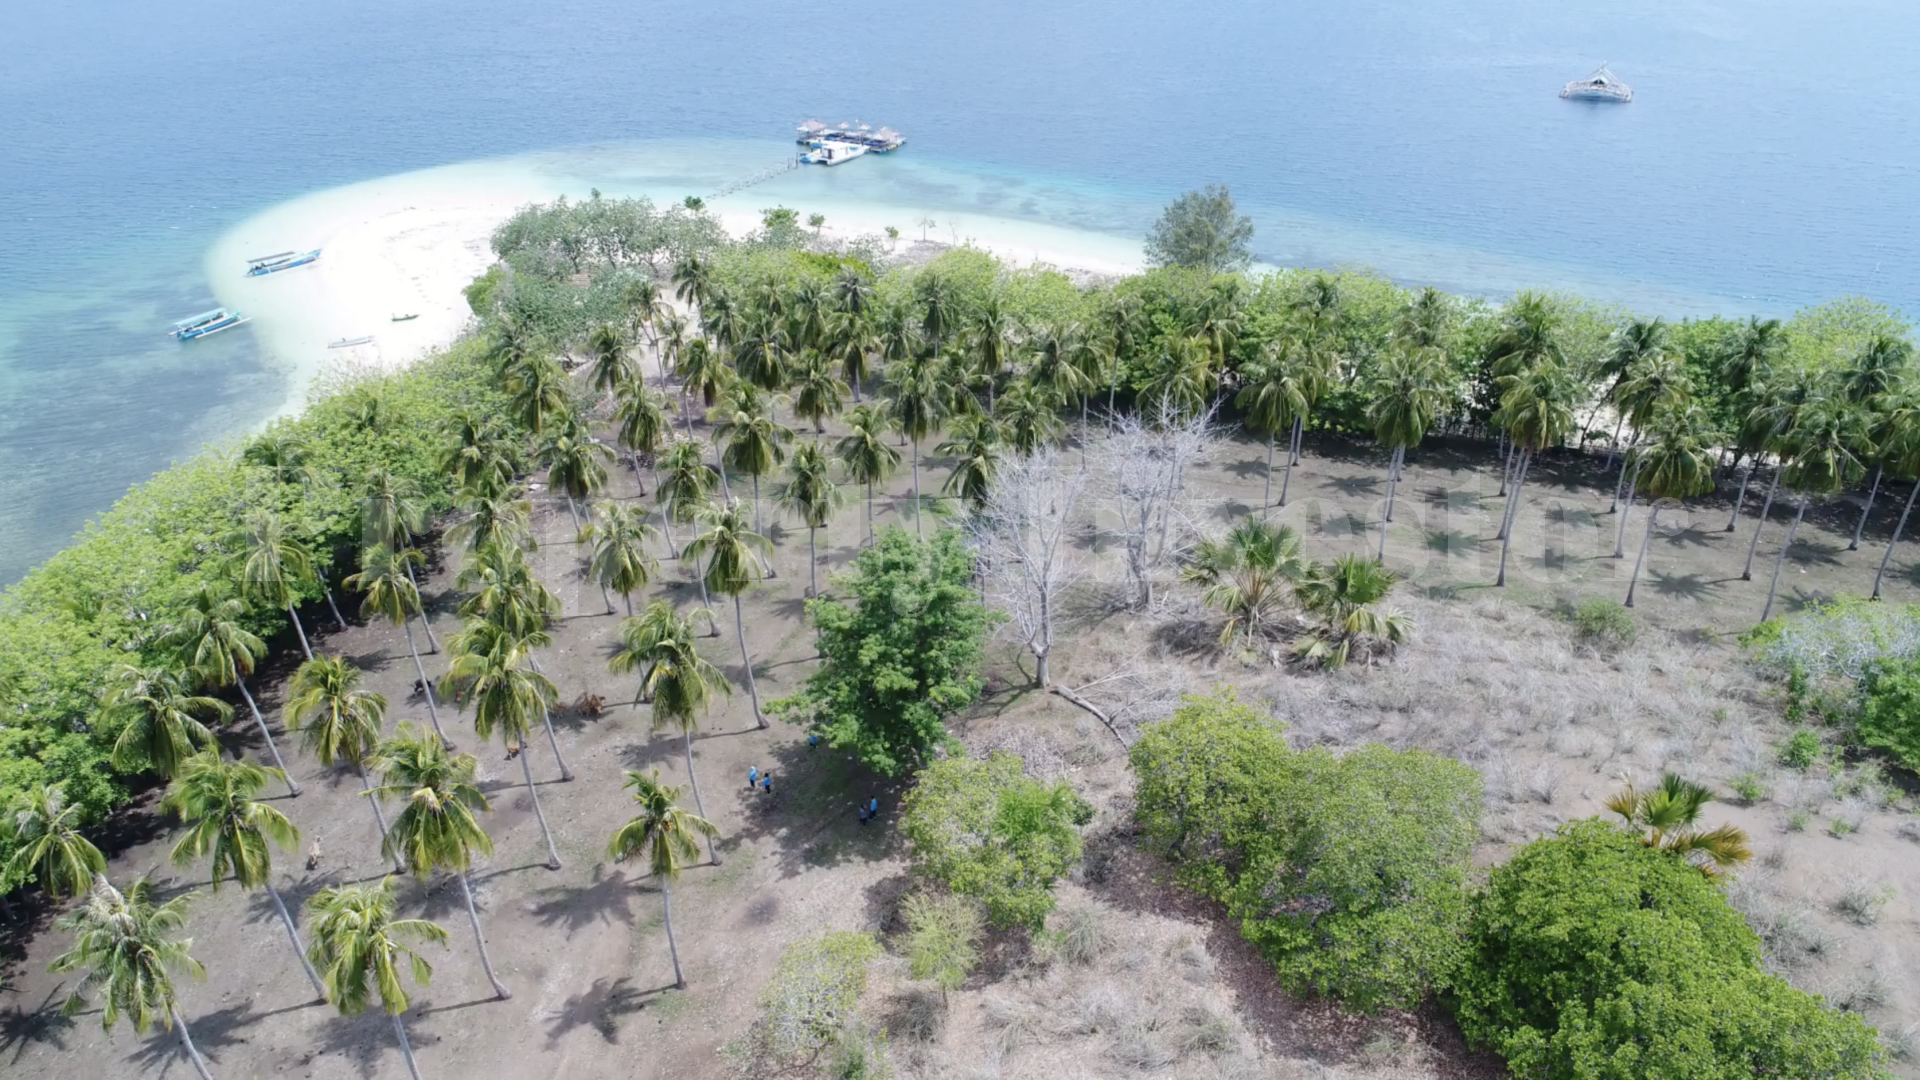 14.9 Hectare Private Virgin Island for Sale Near Lombok, Indonesia